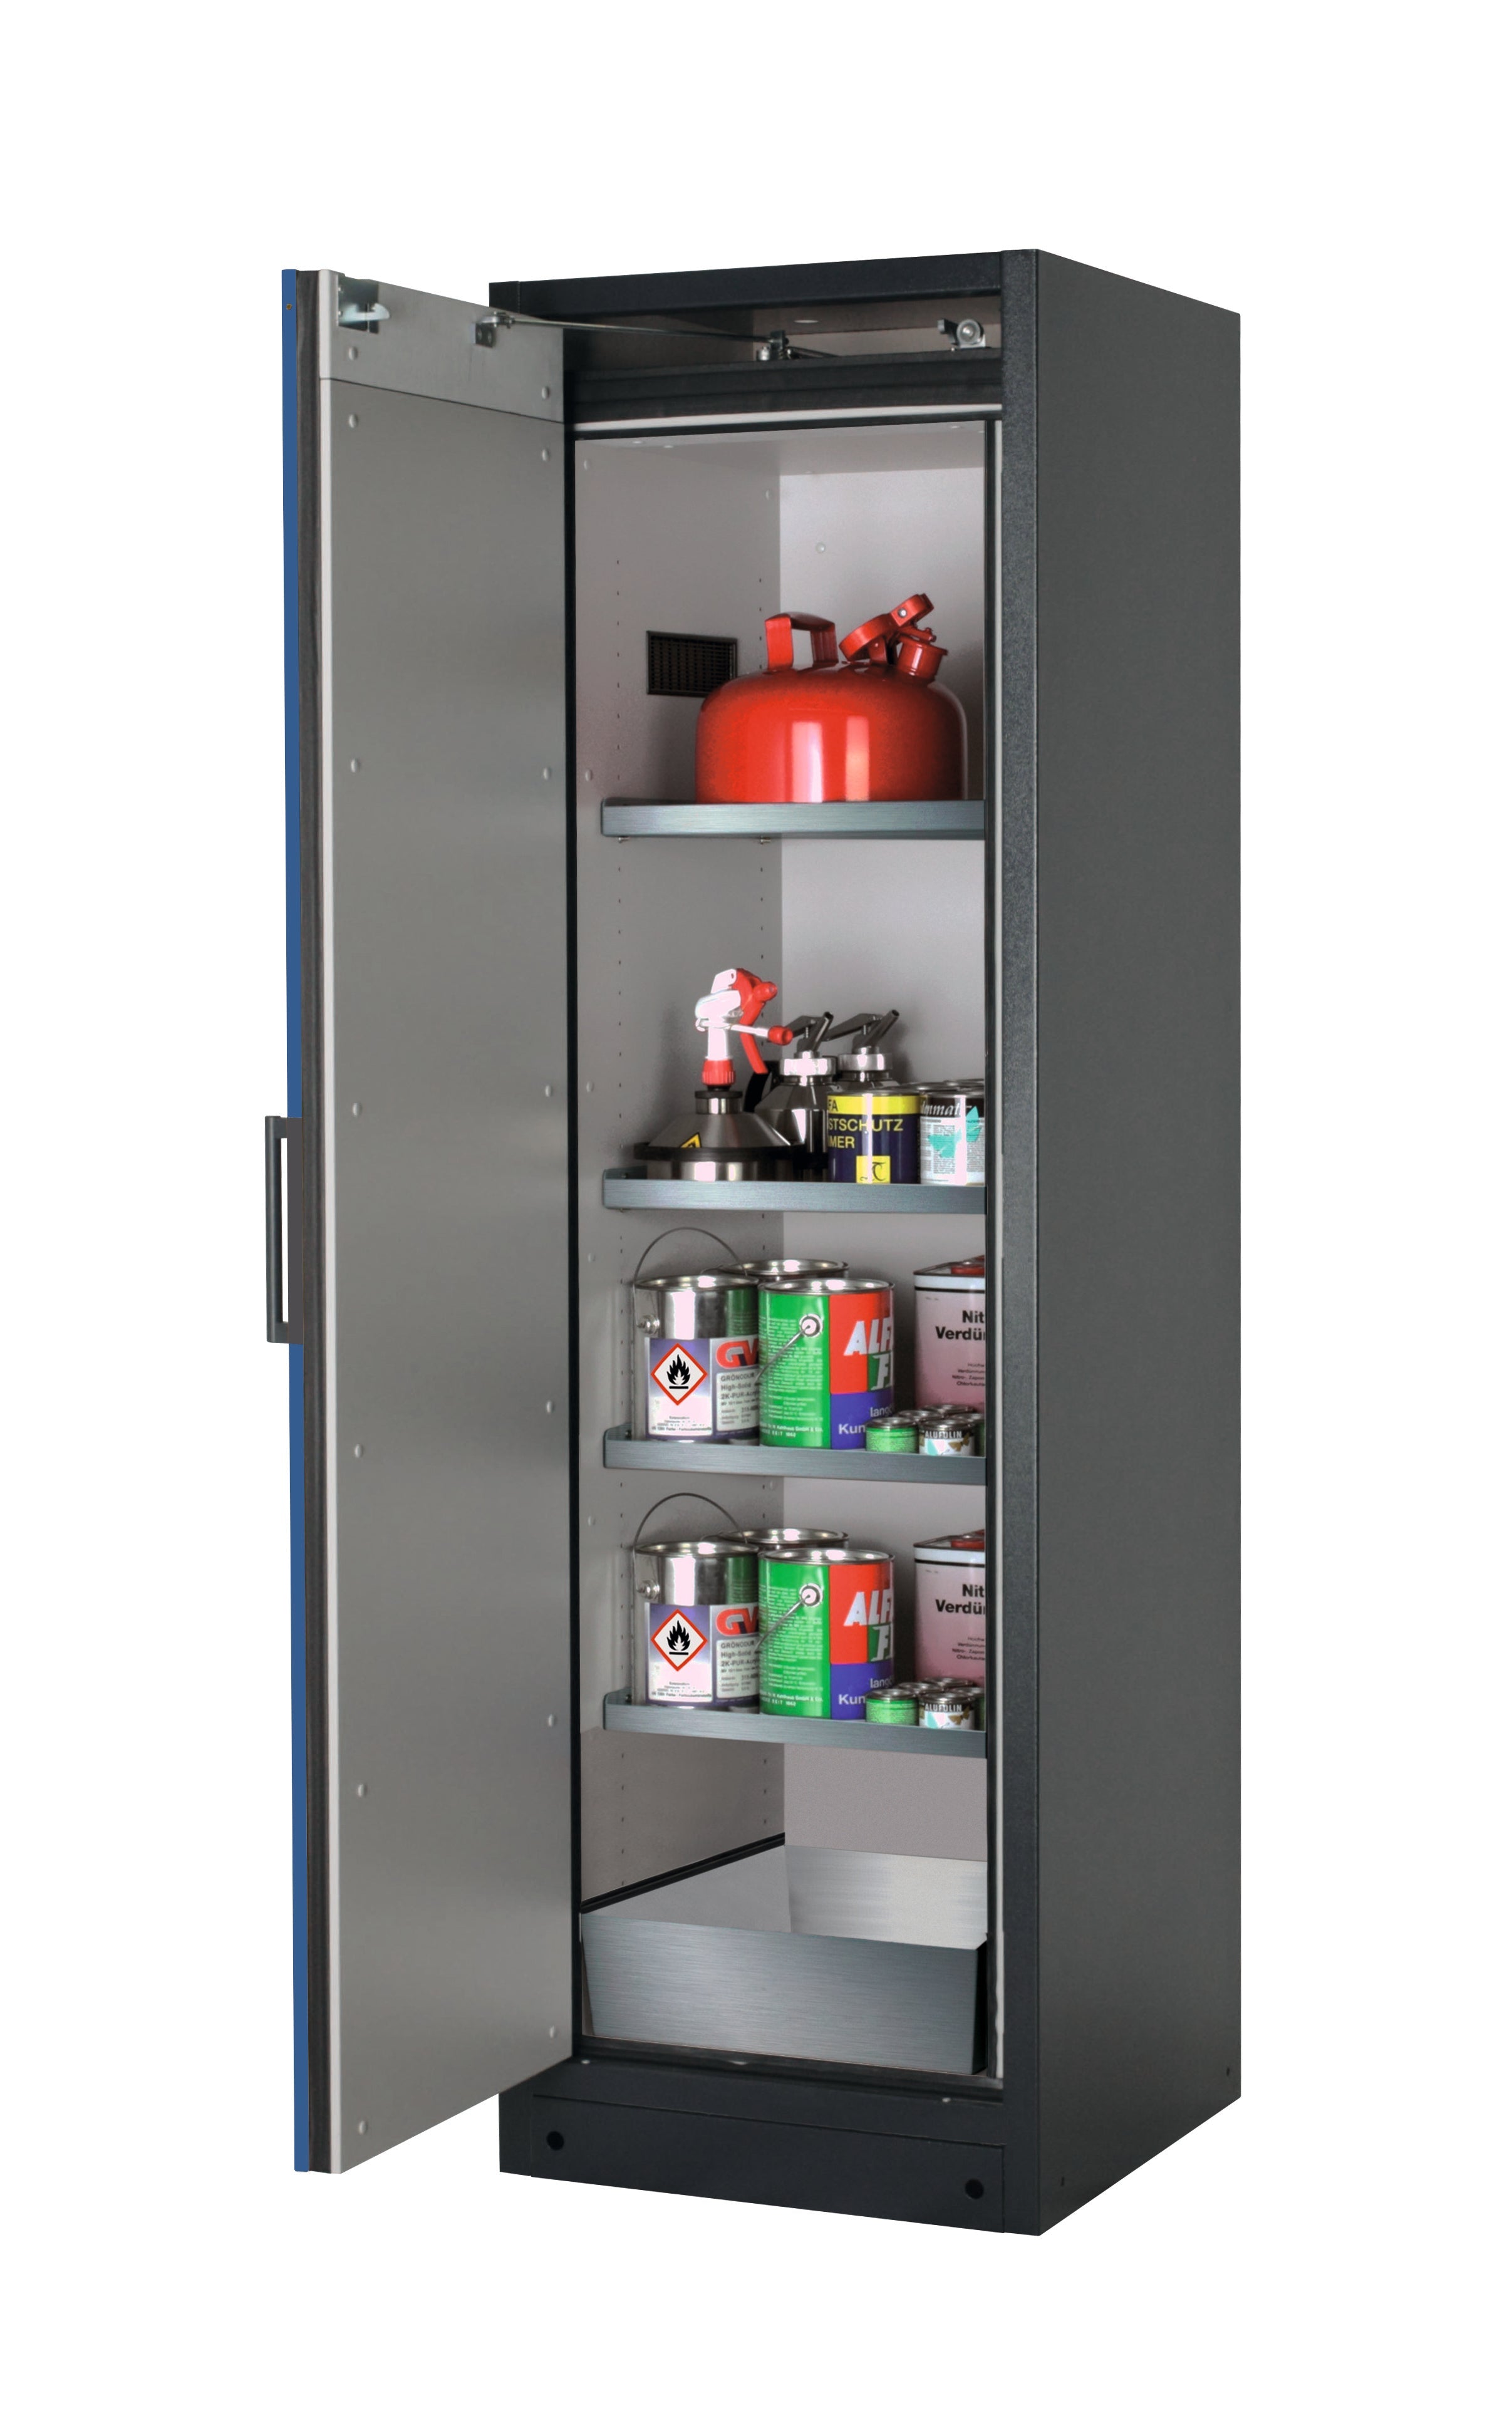 Type 90 safety storage cabinet Q-PEGASUS-90 model Q90.195.060.WDAC in gentian blue RAL 5010 with 4x shelf standard (stainless steel 1.4301),